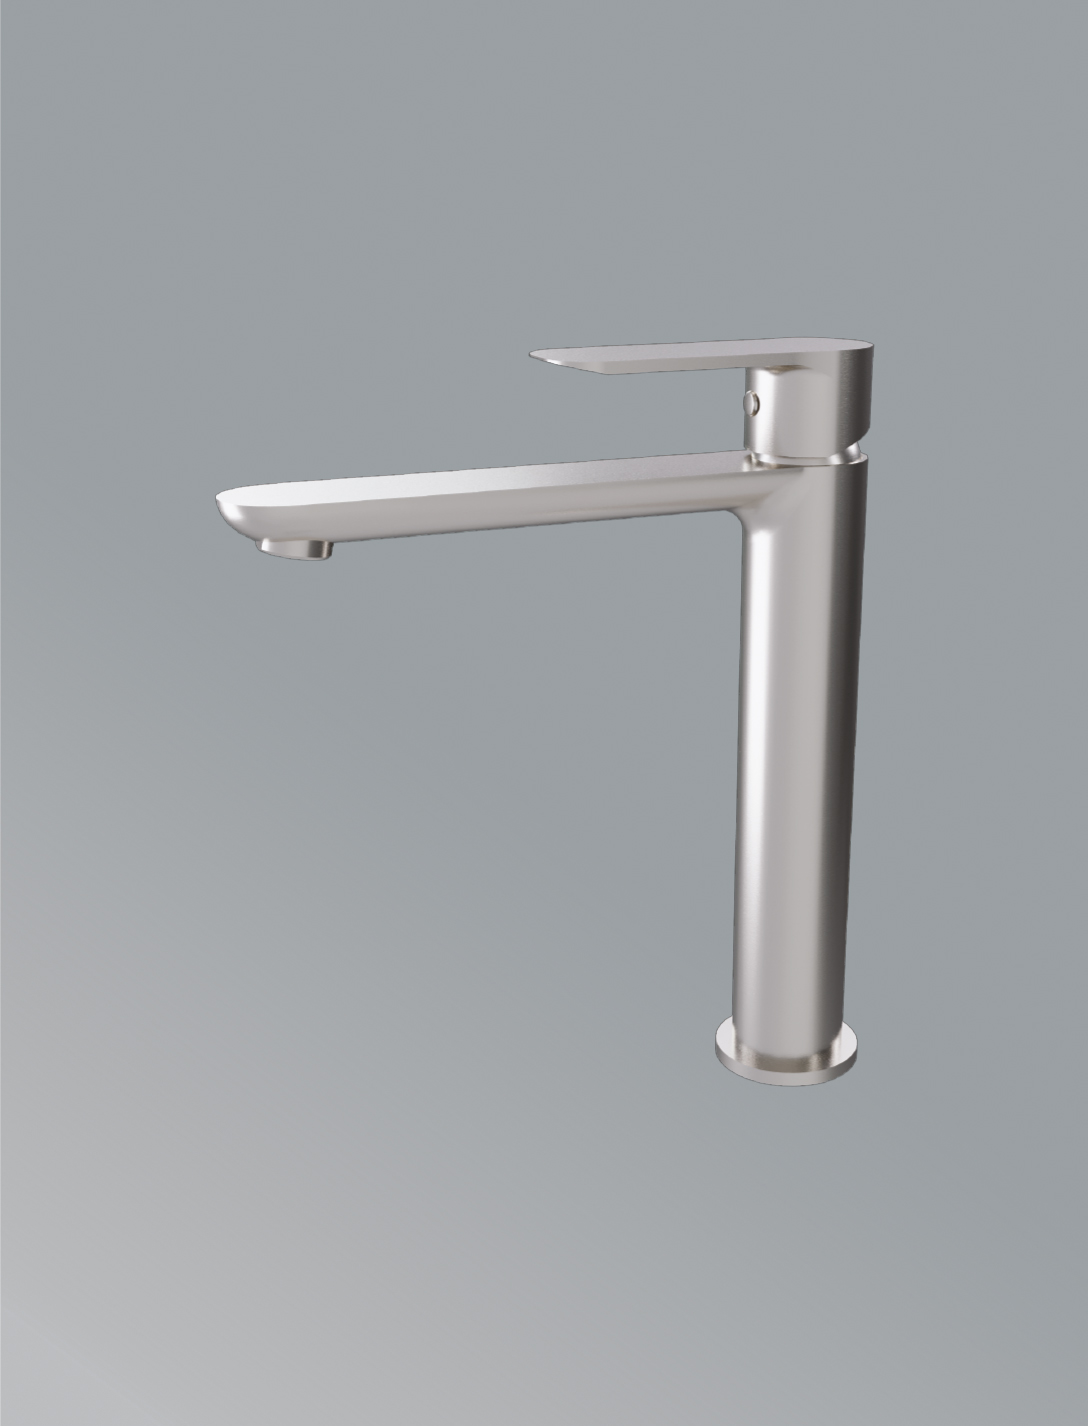   Single Control Basin Faucet Tall In Brushed Nickel